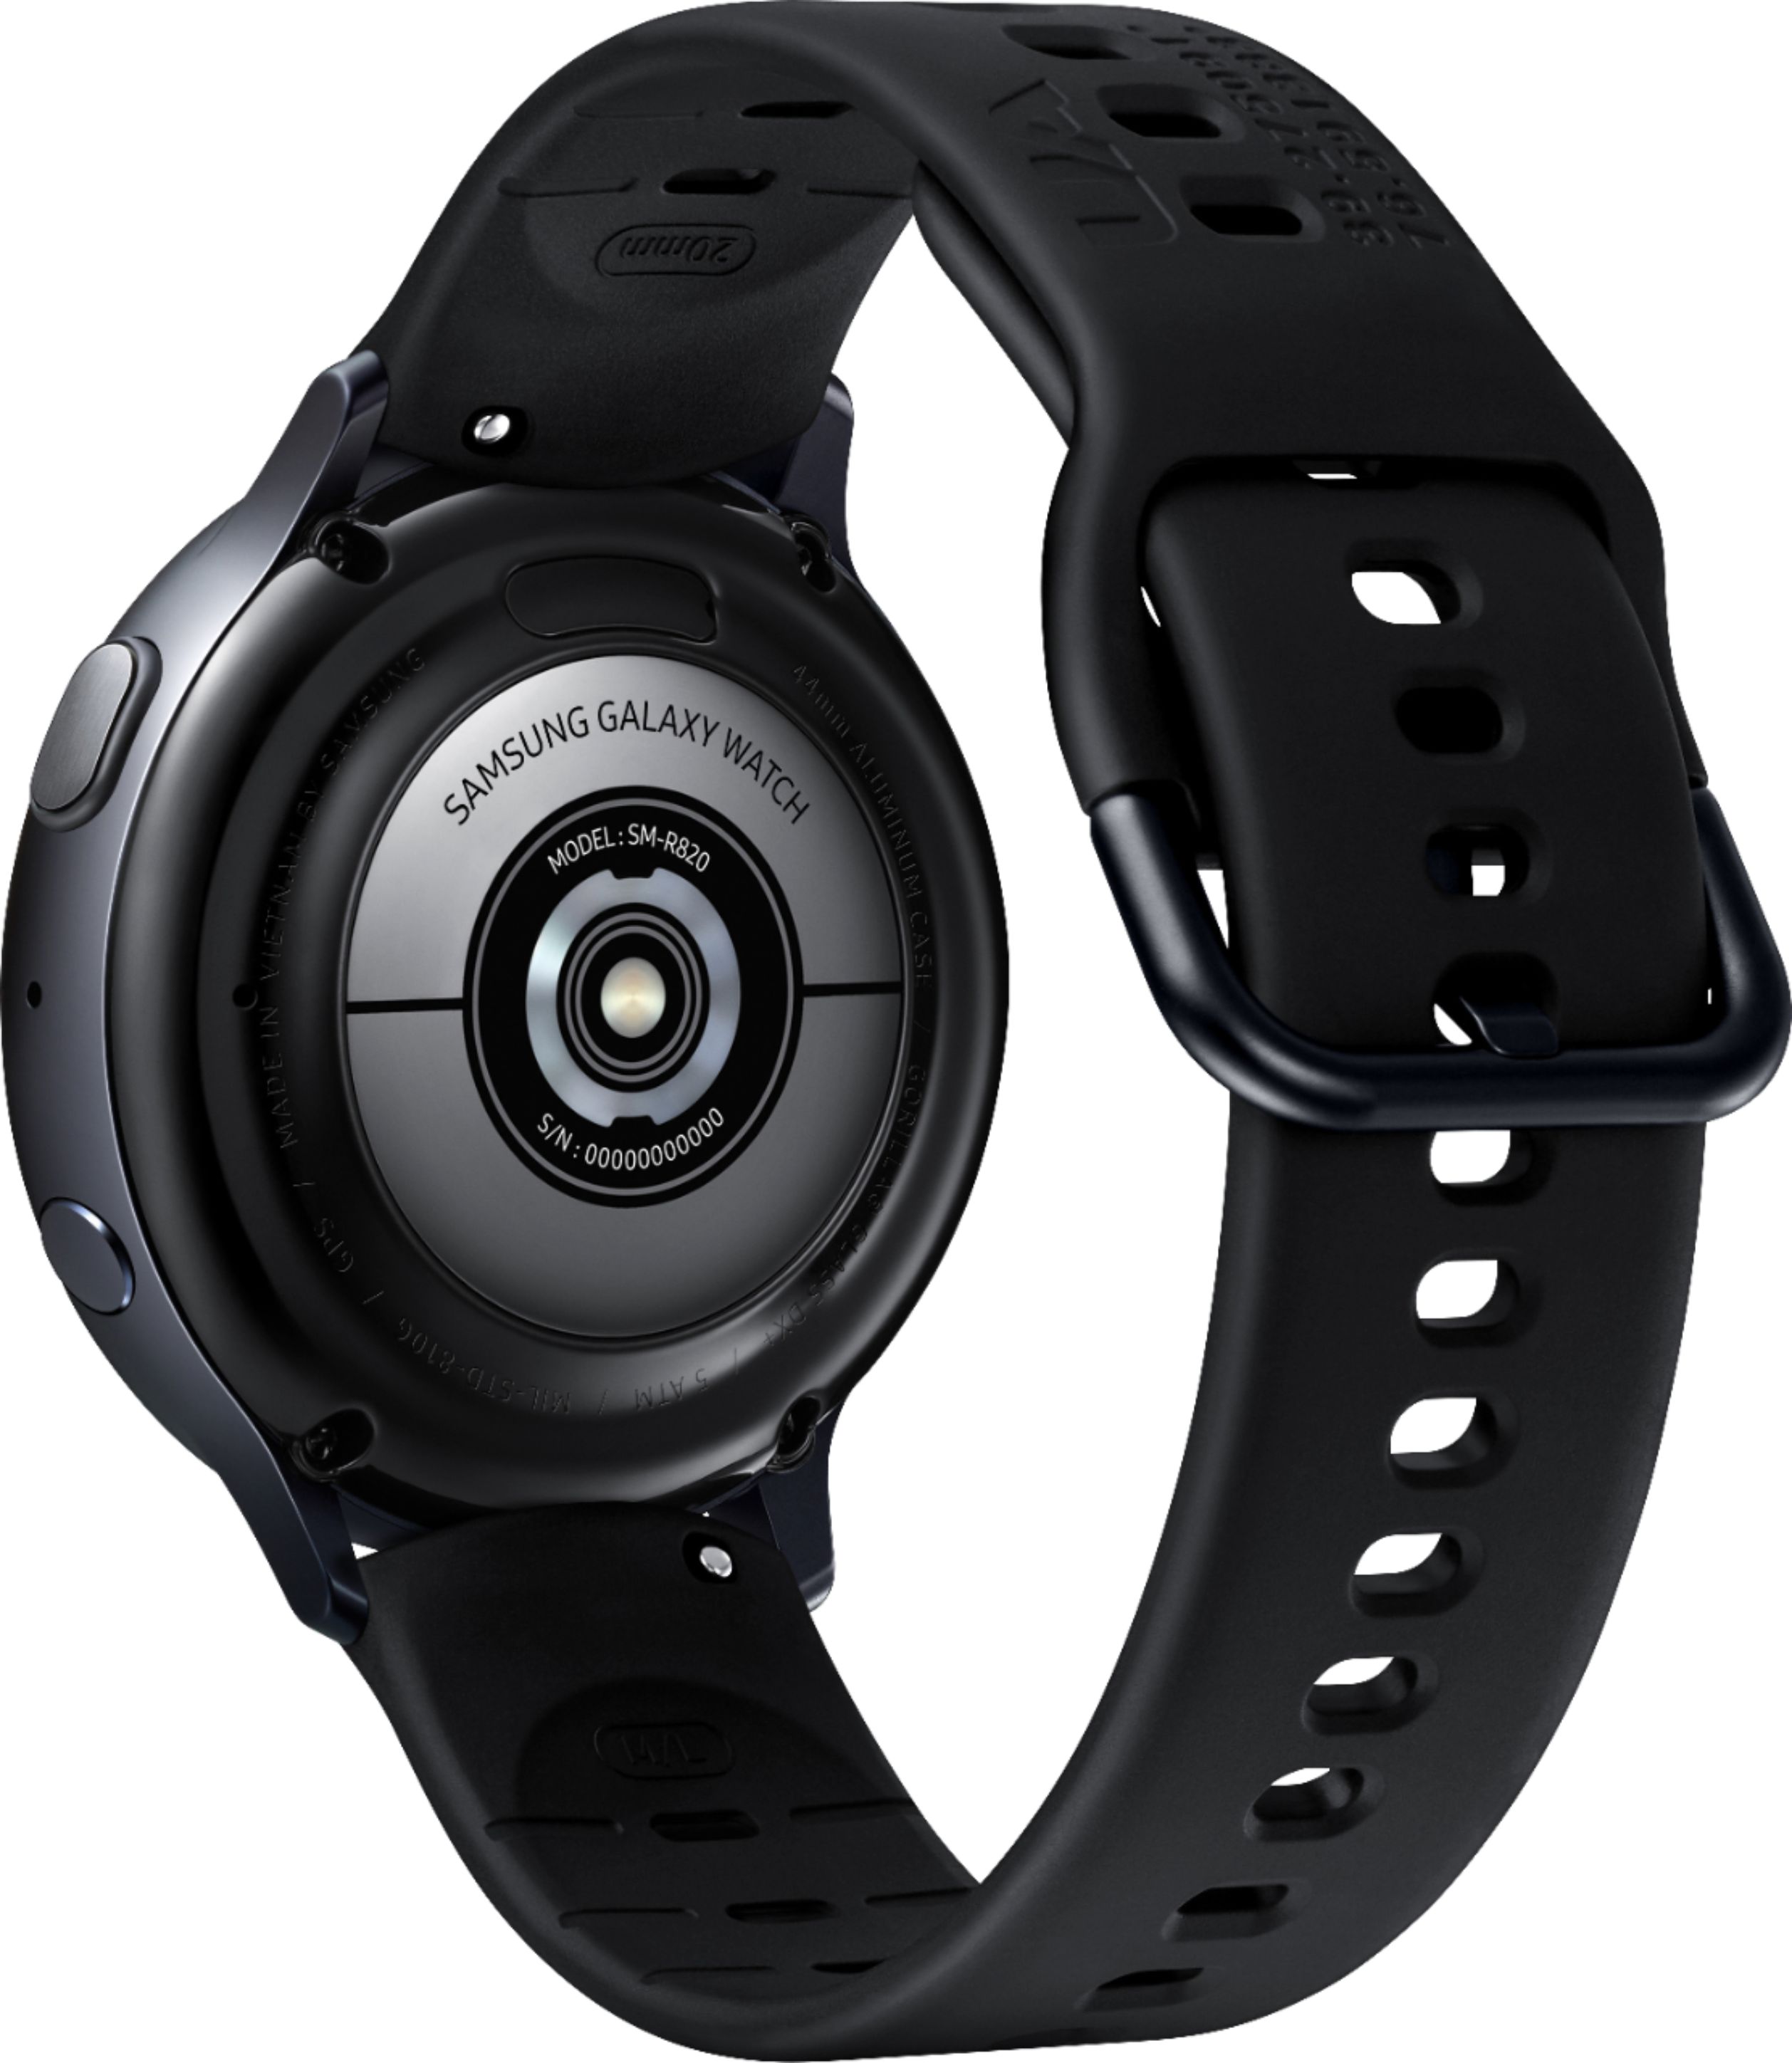 Back View: SUUNTO - 5 Sports Tracking watch with GPS & Heart Rate - All Black